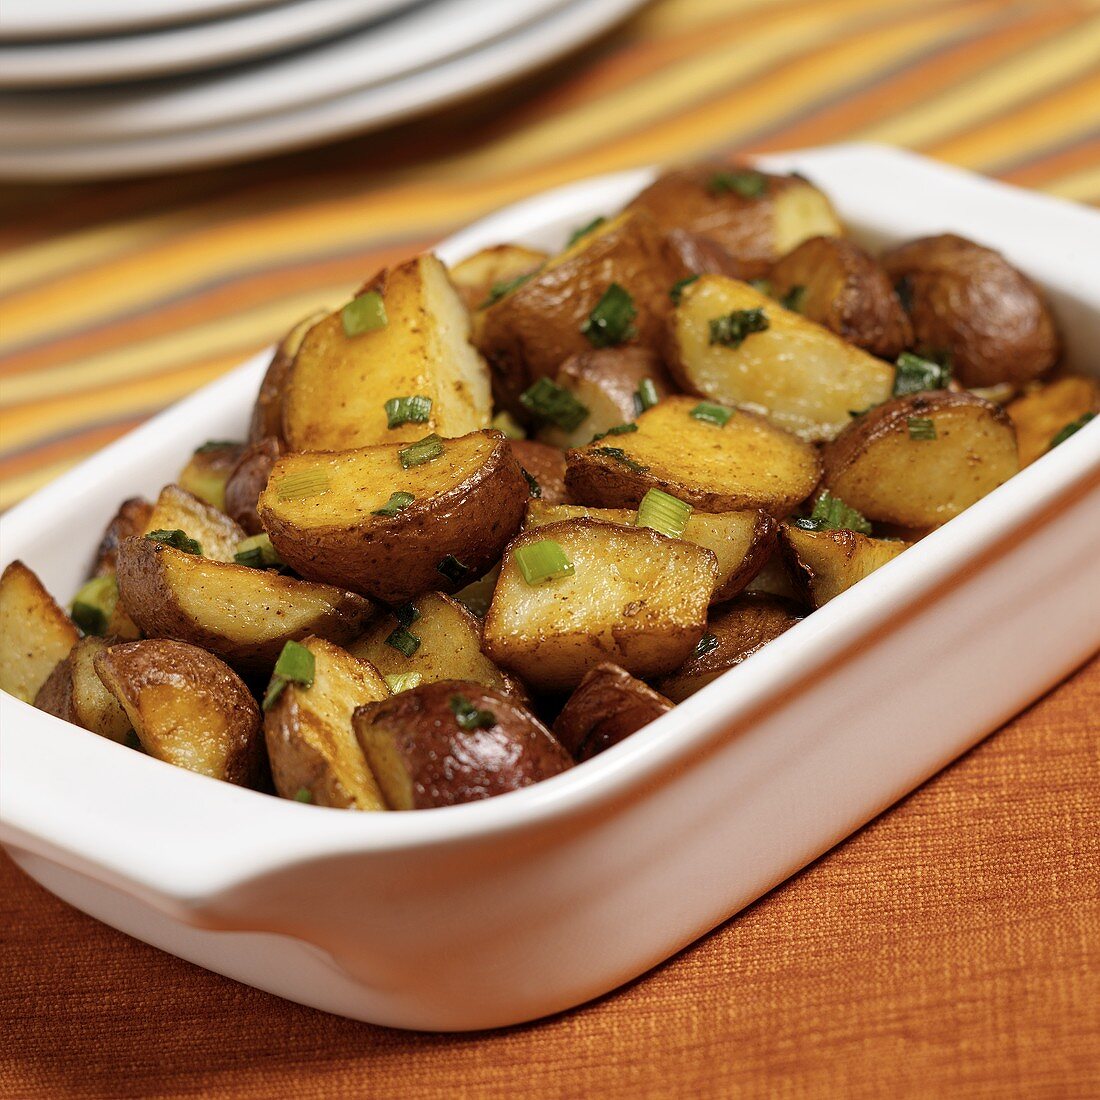 Roast red potatoes (with skins)